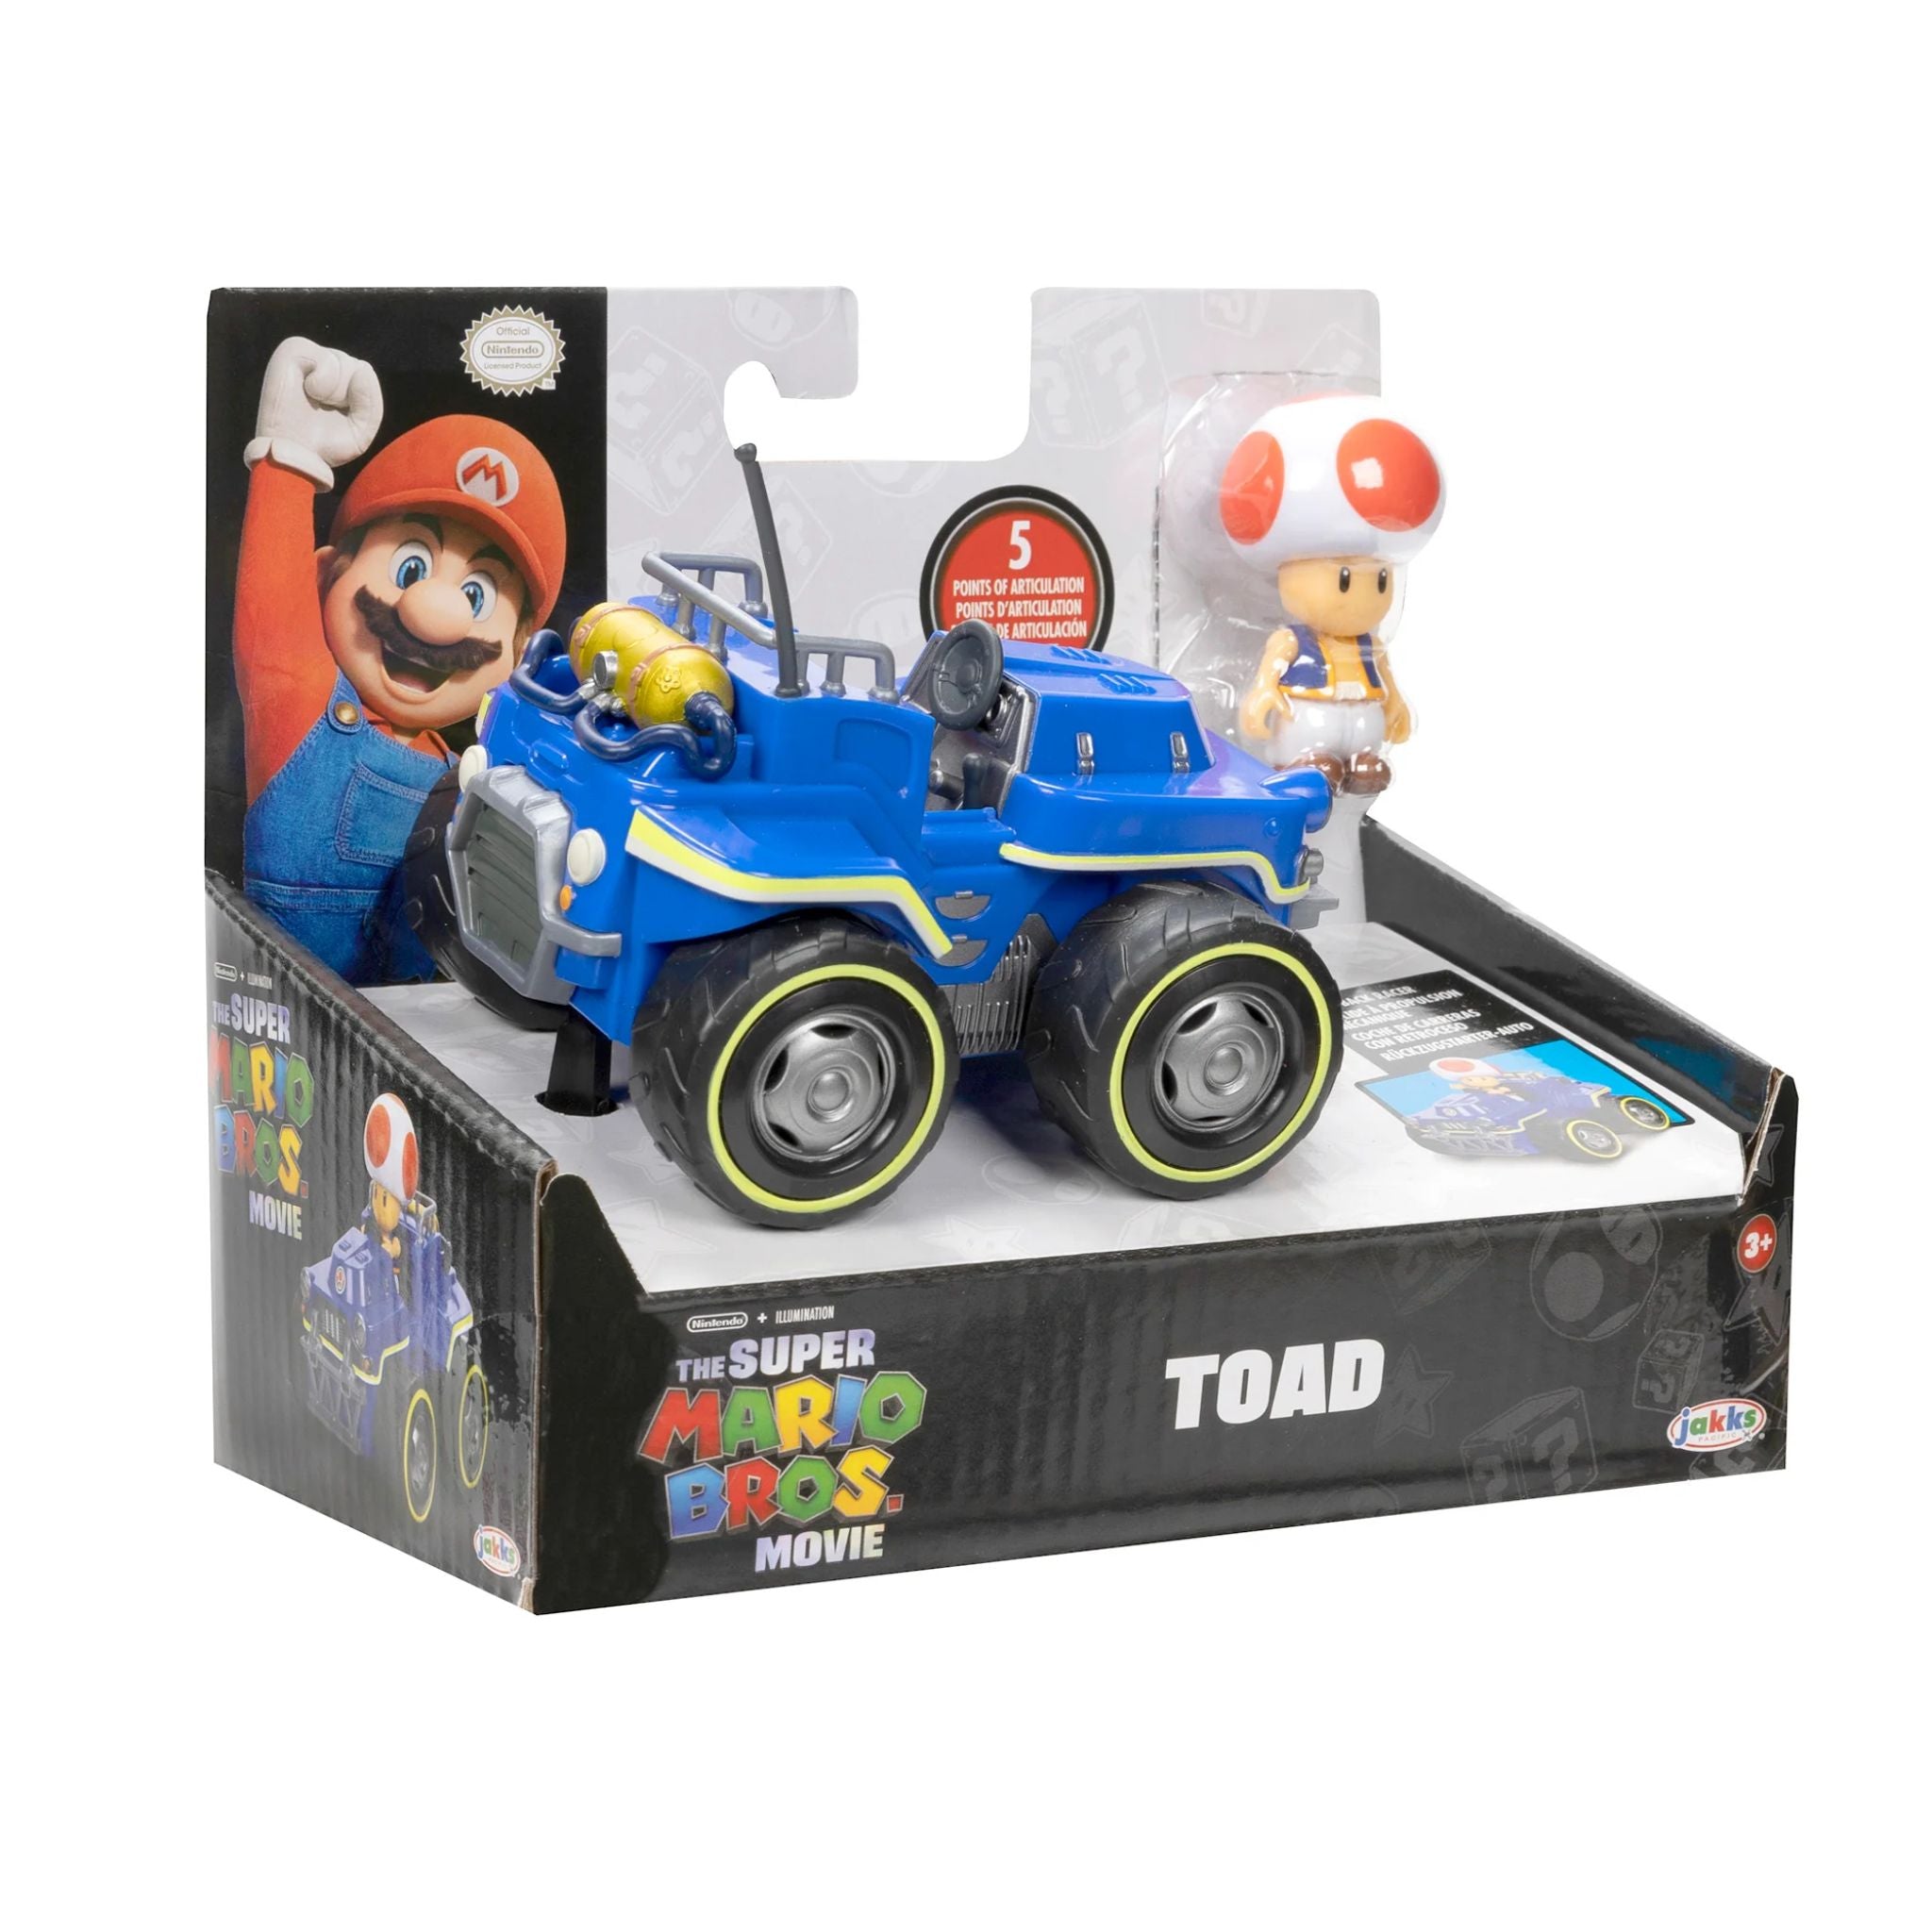 Super Mario Bros. Movie 2.5" Figure with Pull Back Racer - Toad (US-417214-T)